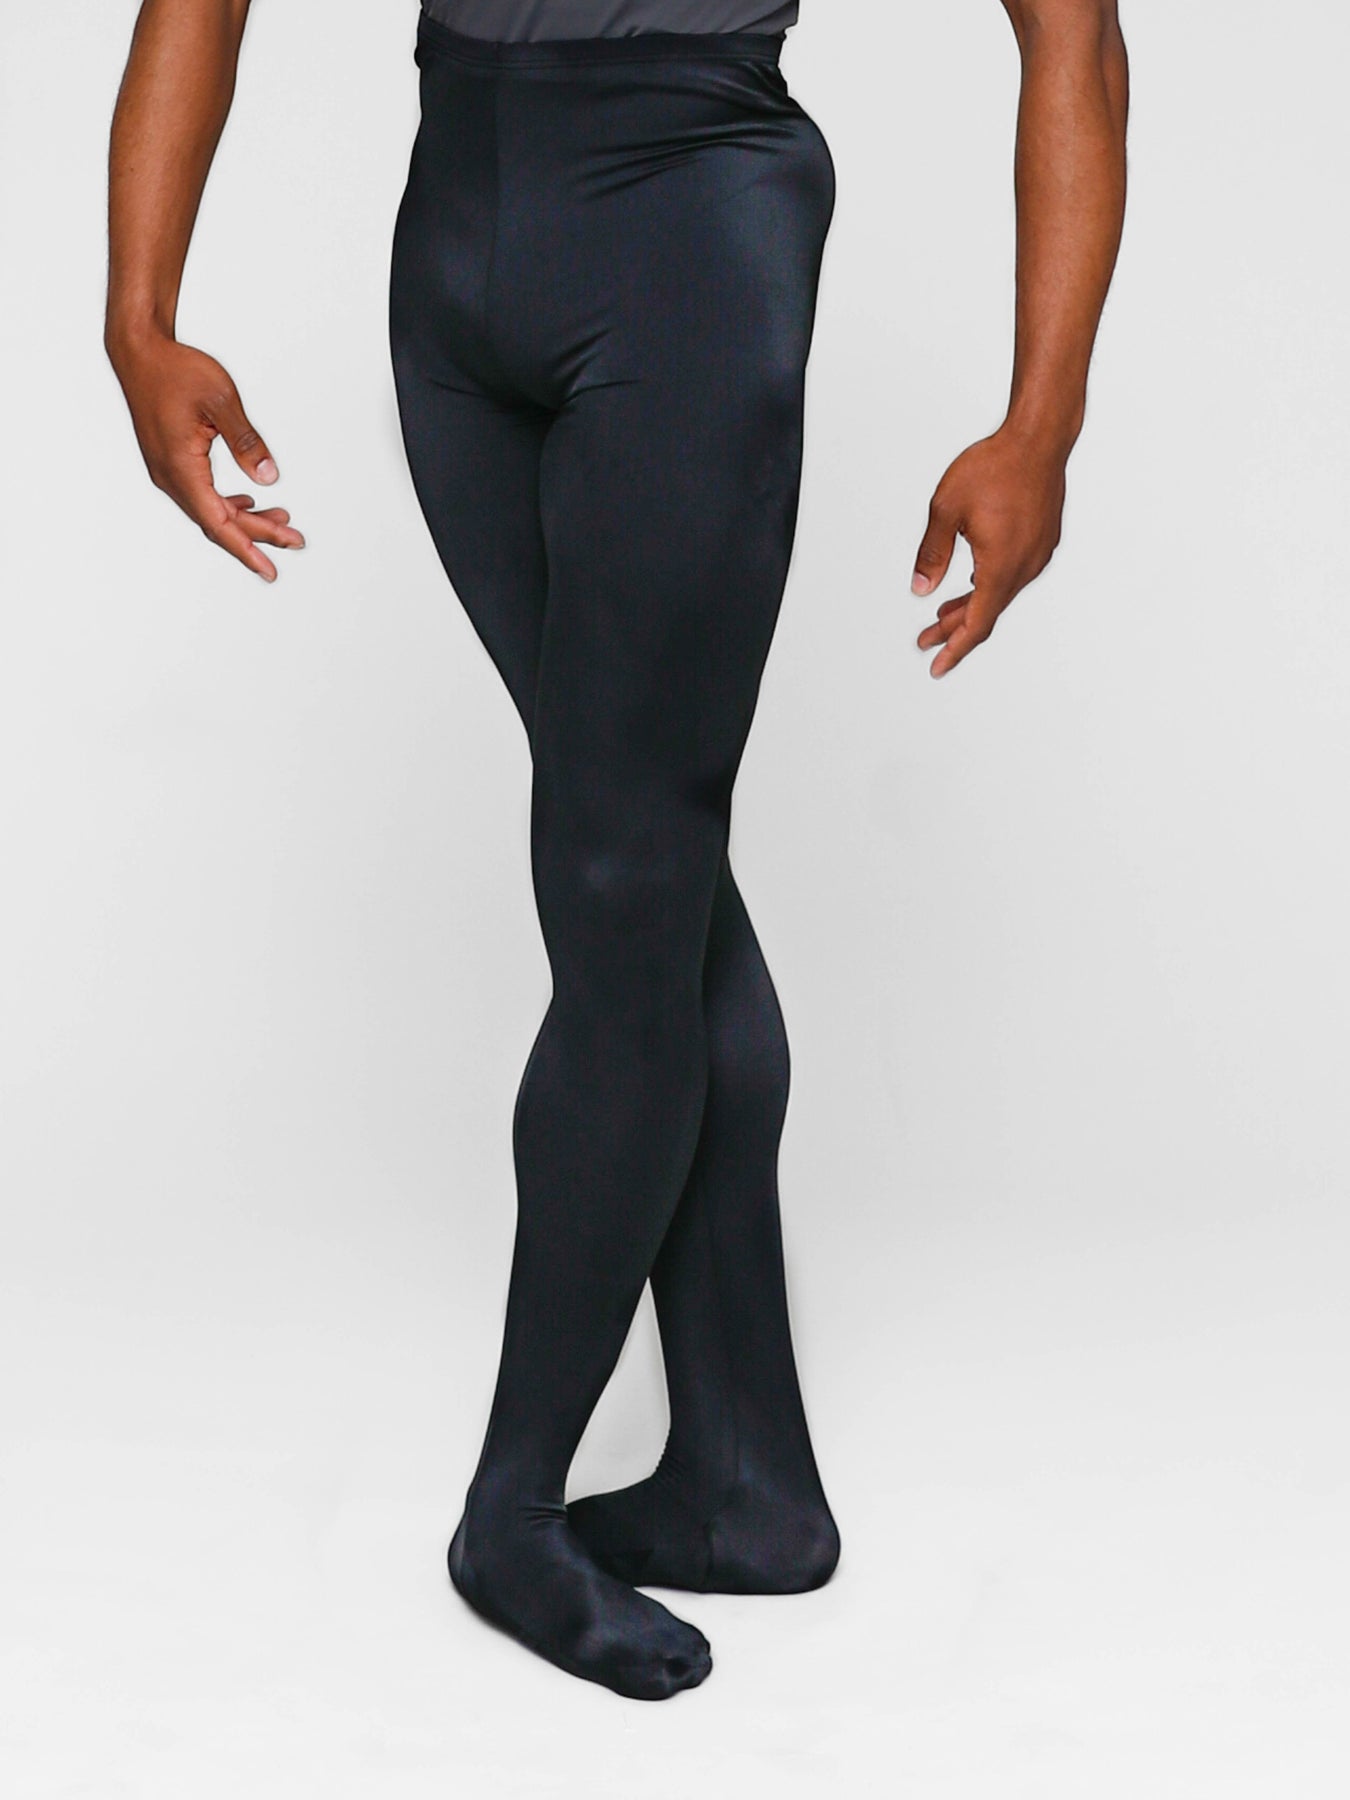 Body Wrappers Mens' Convertible Tights